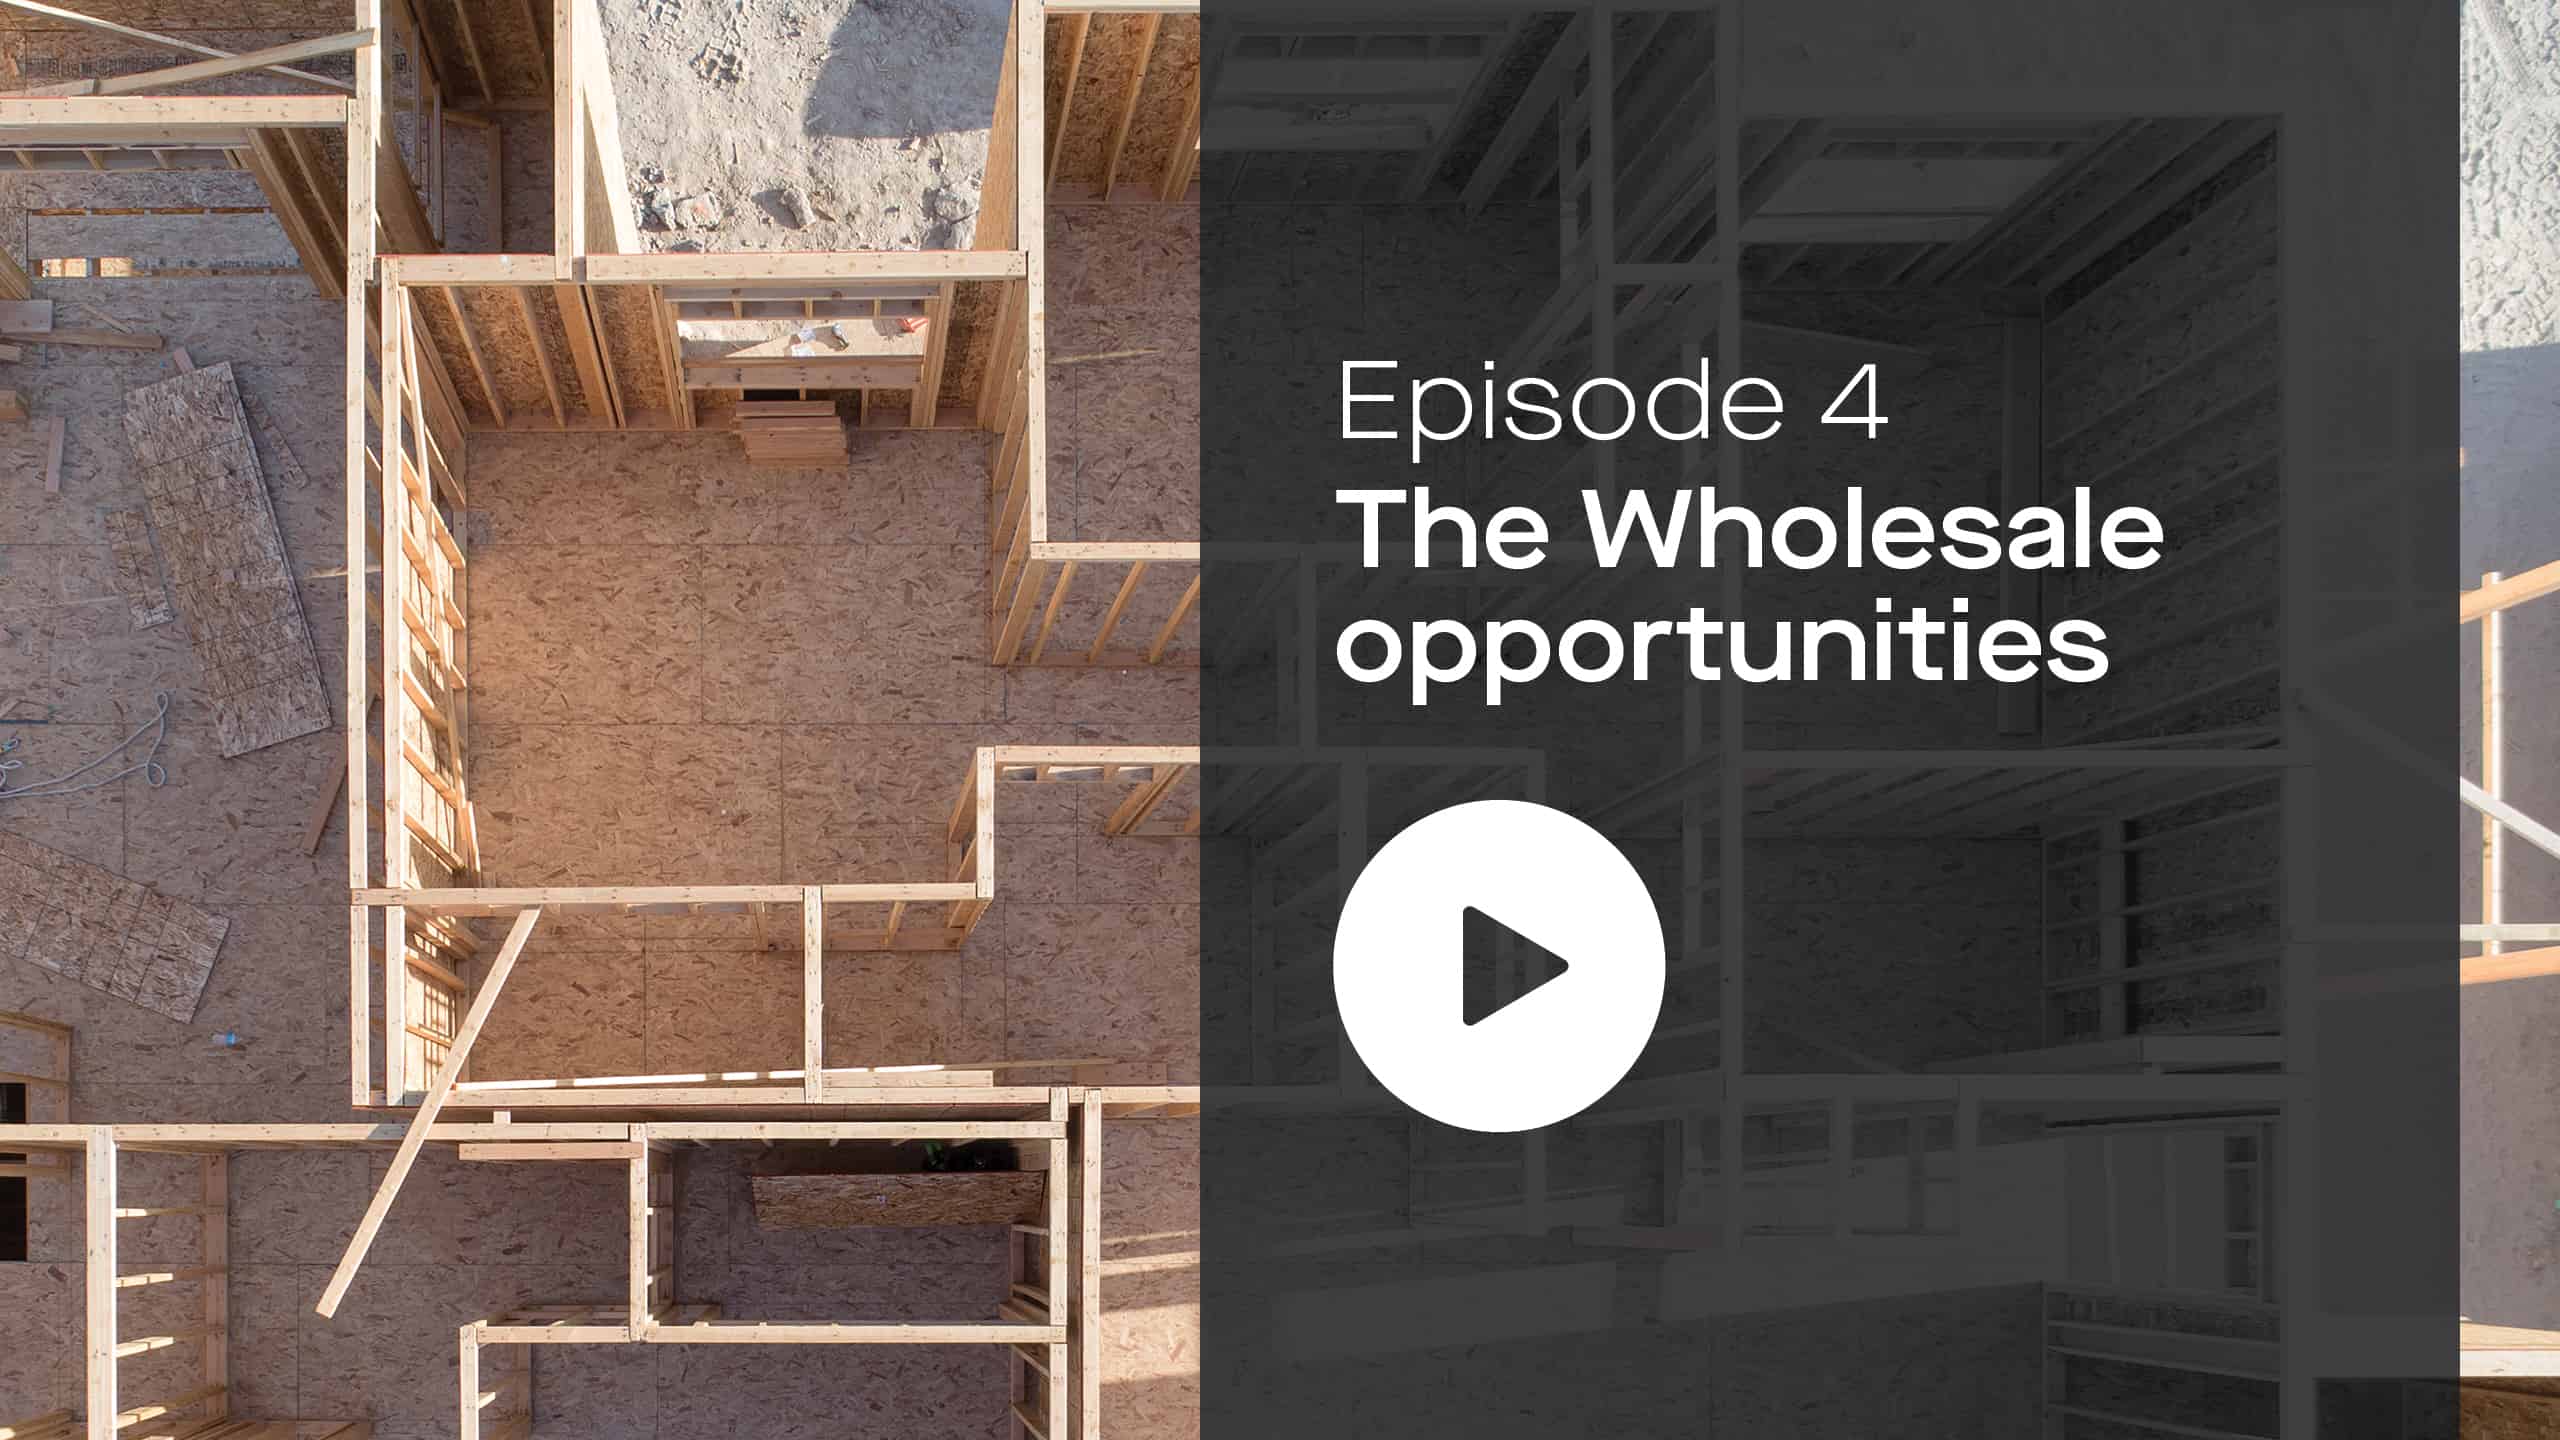 The Wholesale opportunities